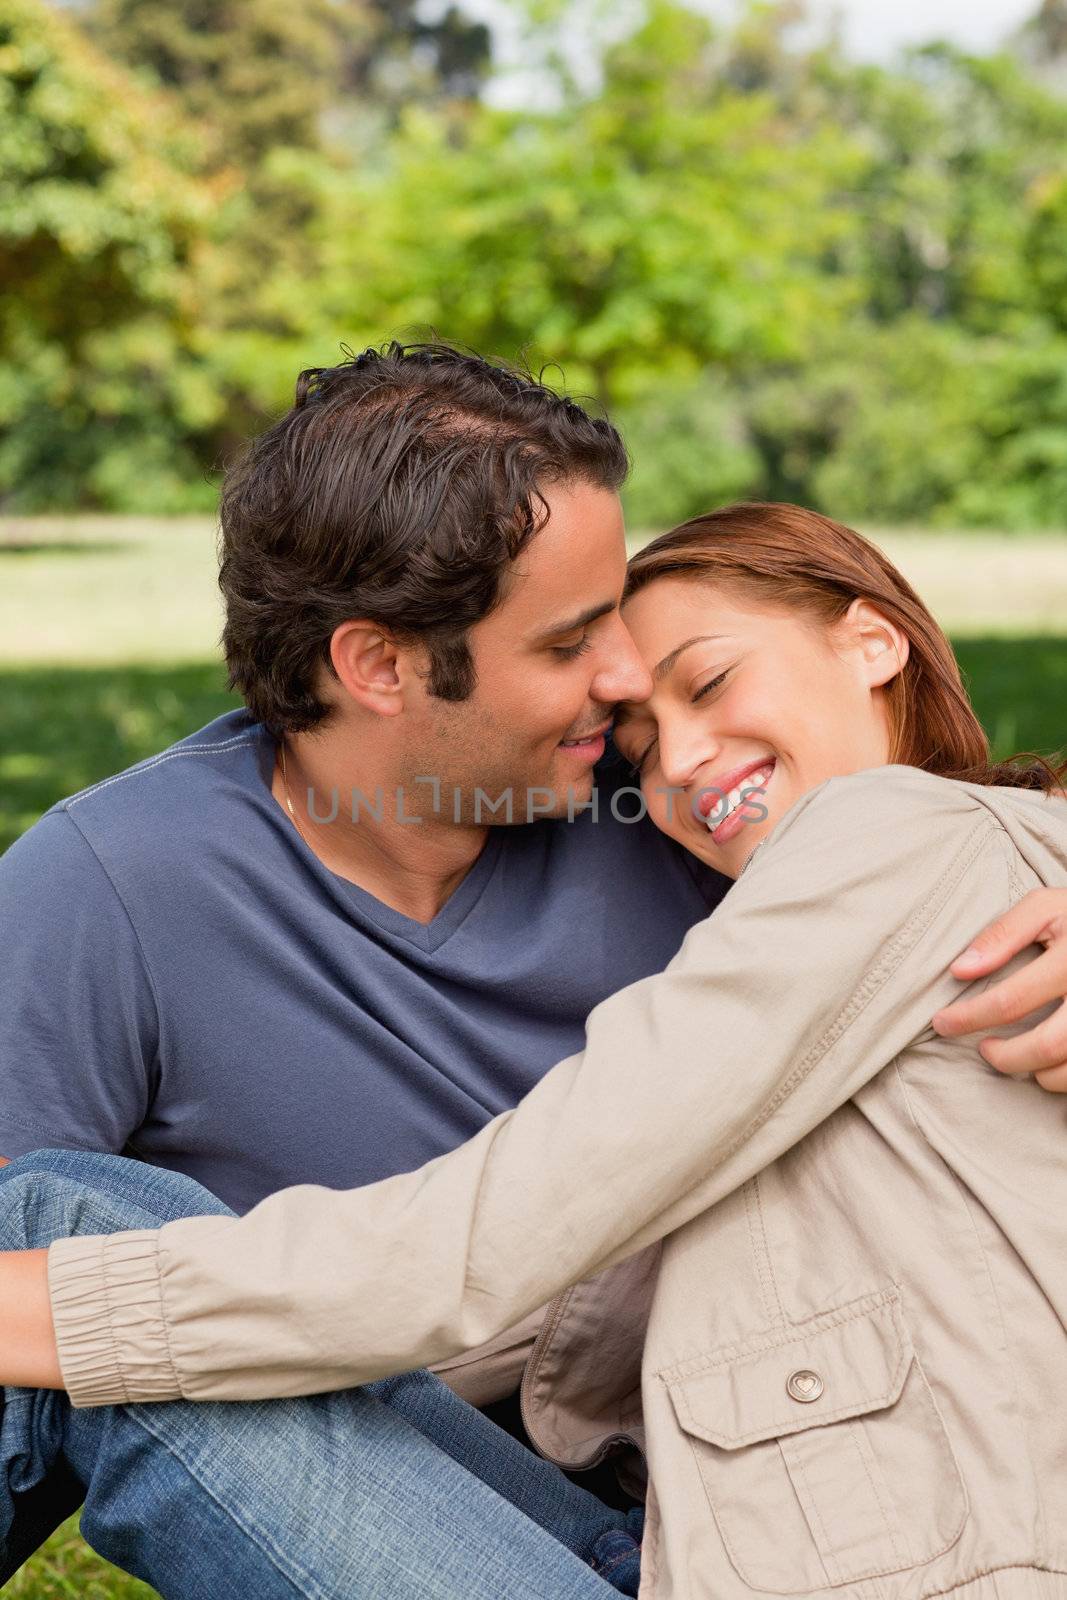 Man with his arm around his friend who is resting her head on his shoulders with her eyes closed